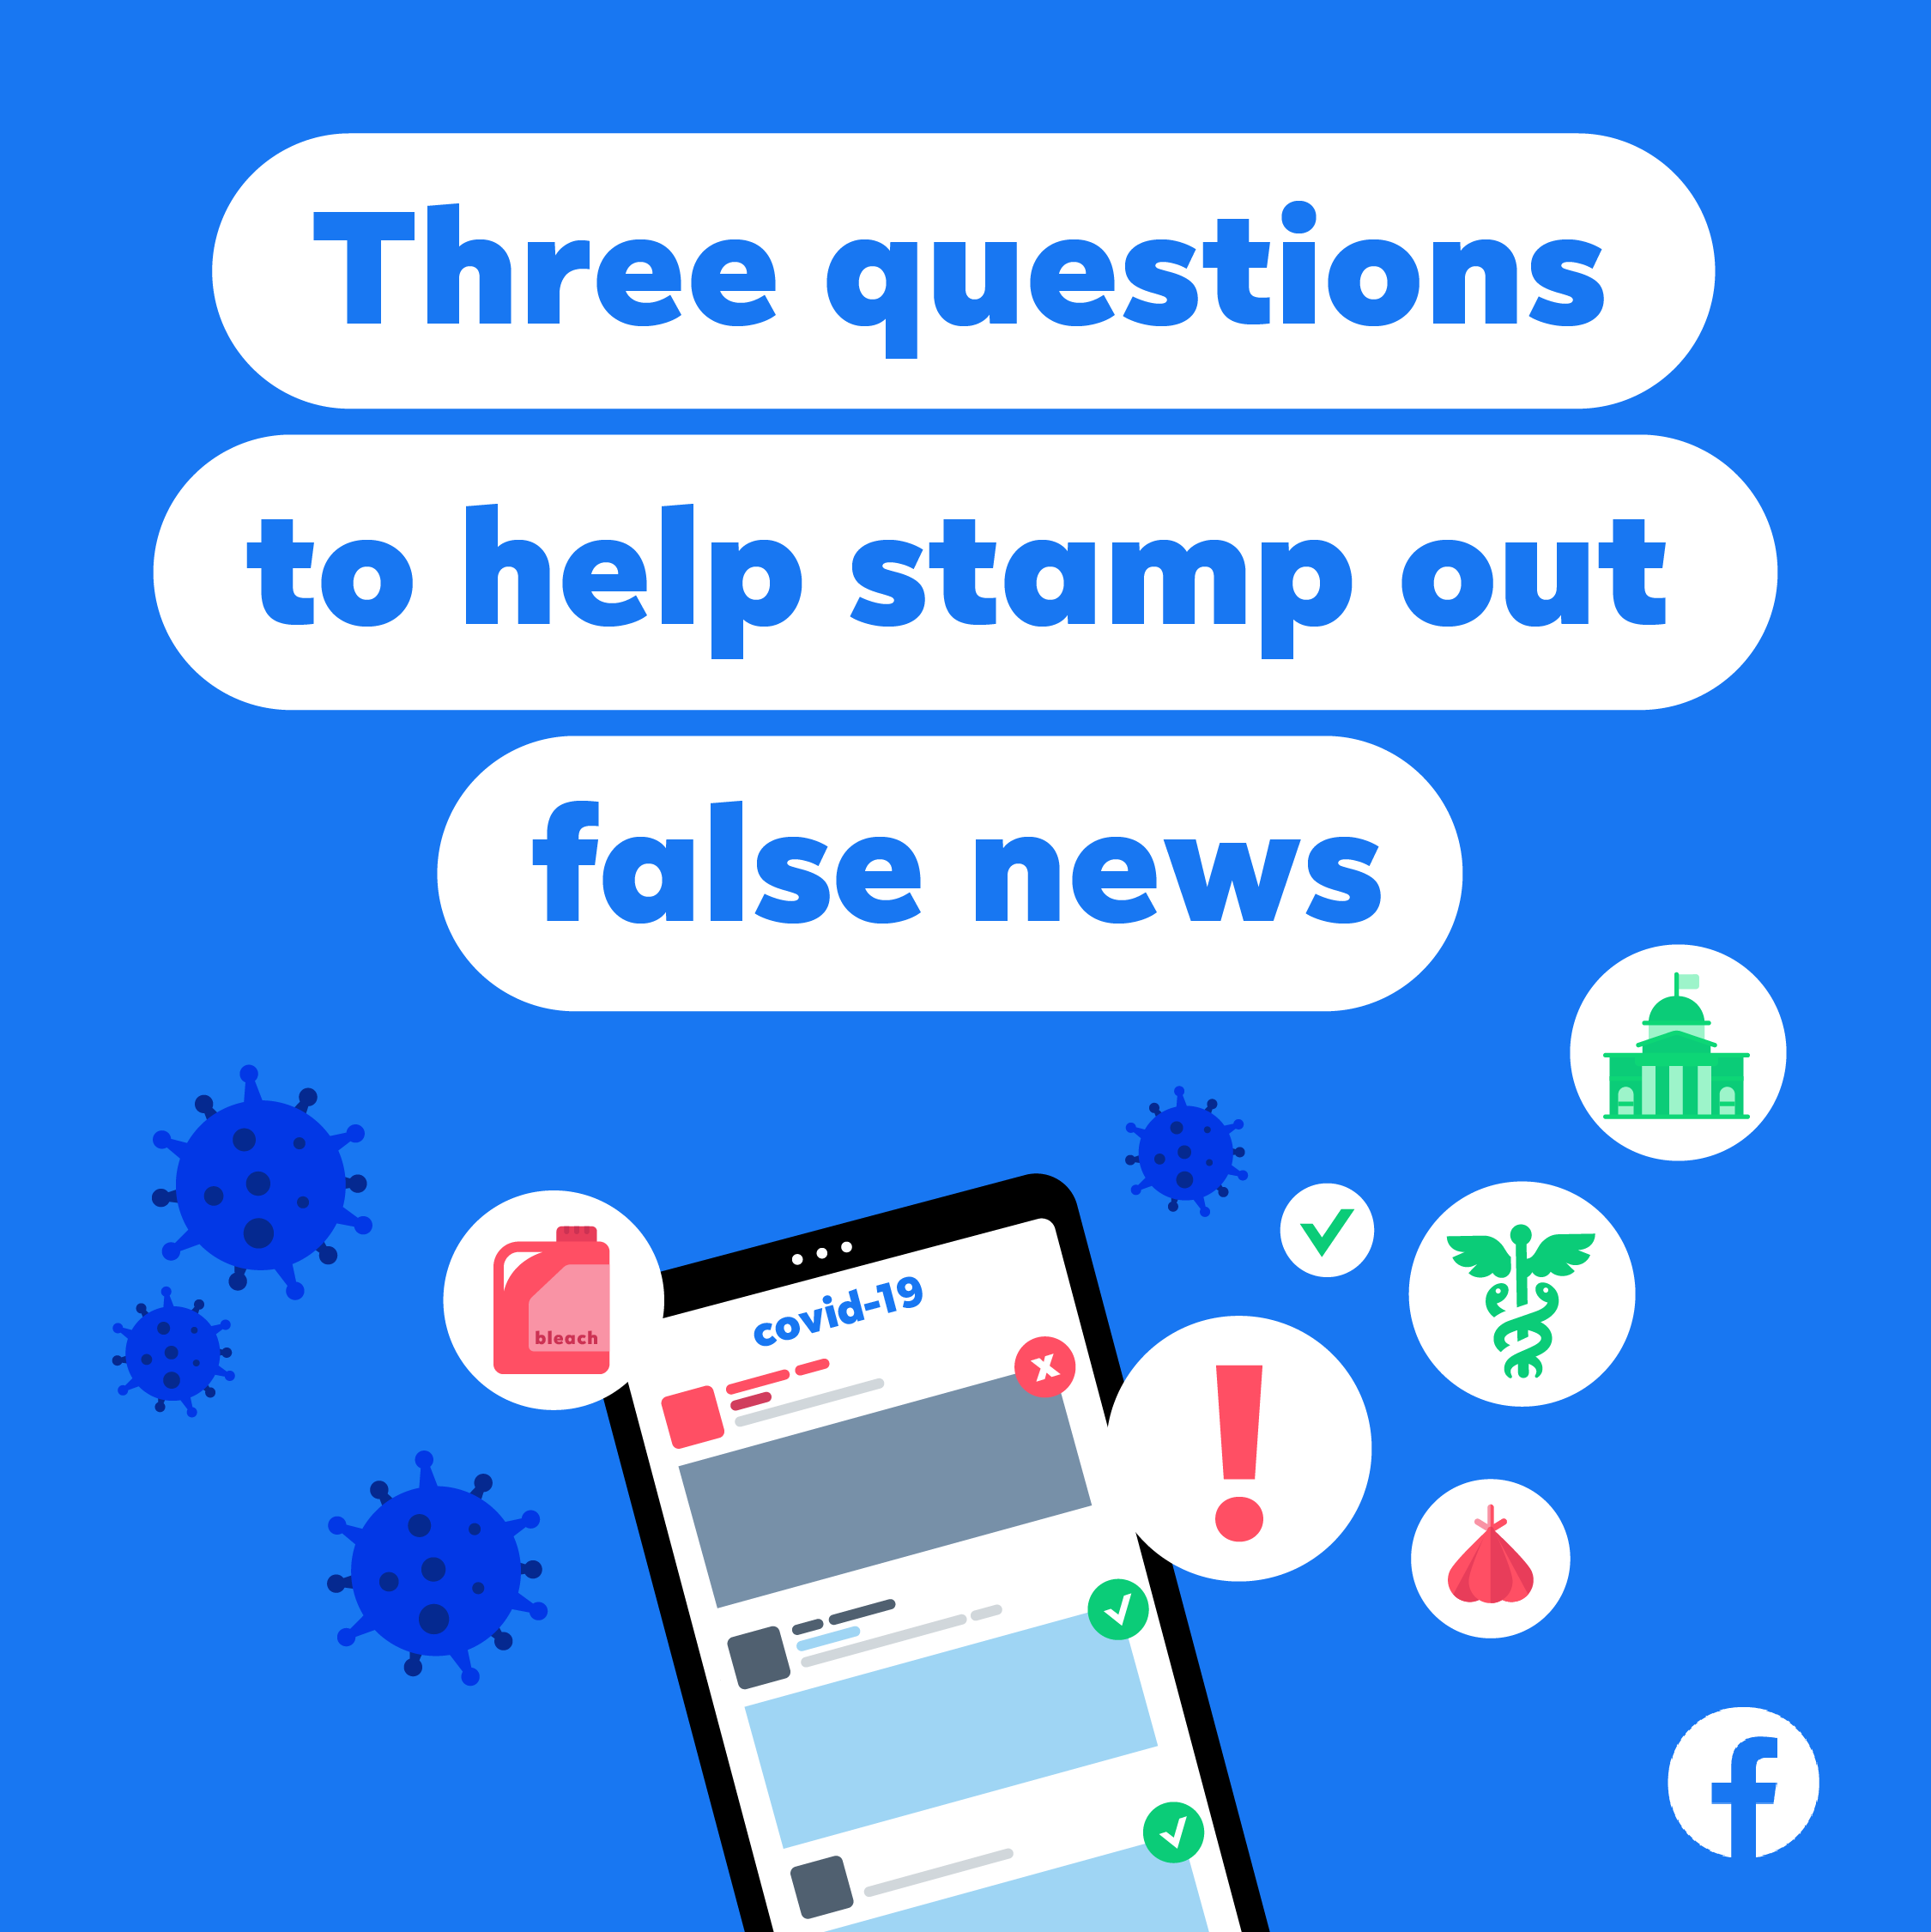 One of the campaign ads used by Facebook to make users more aware of fake news